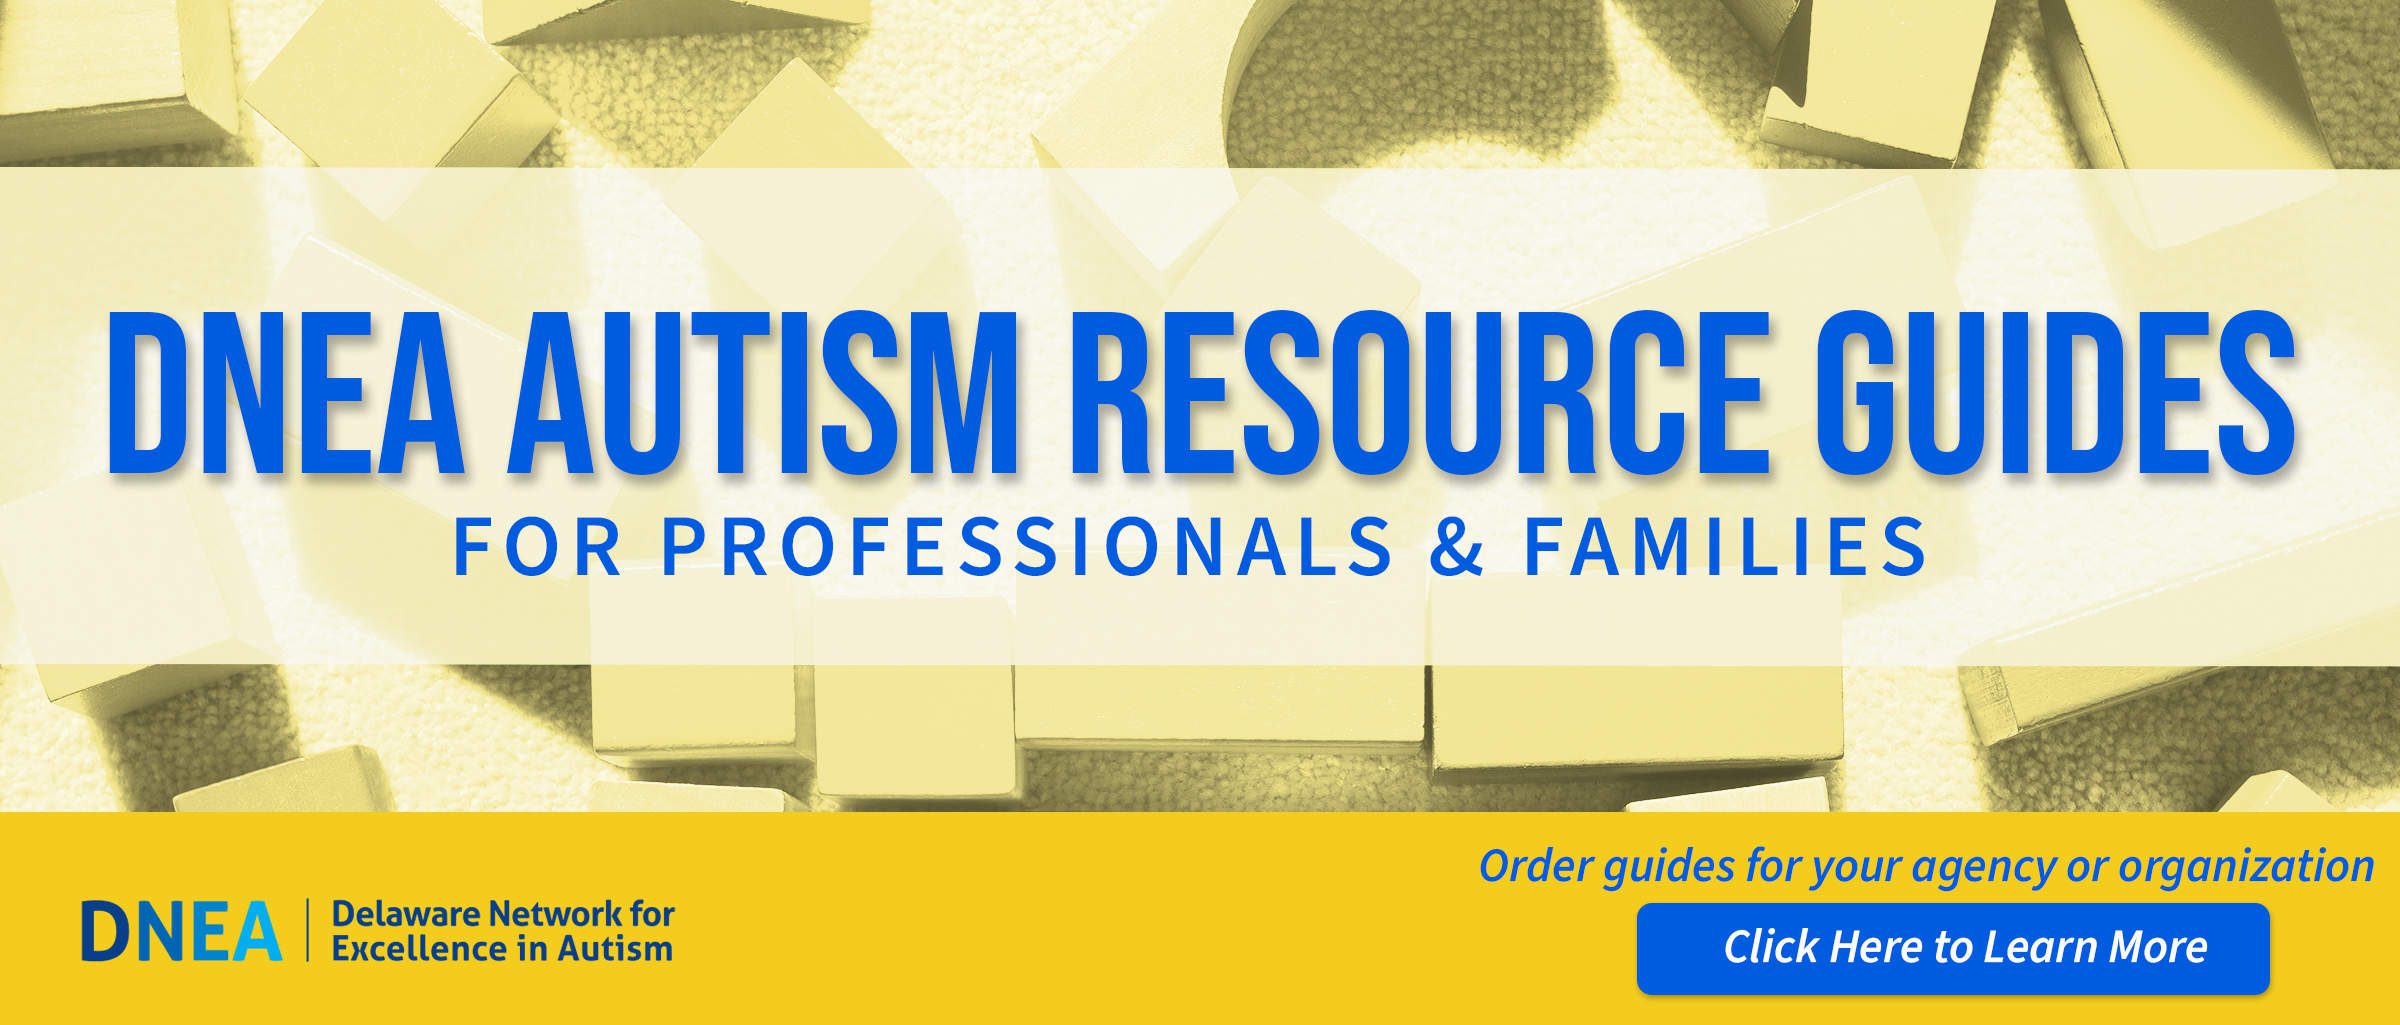 Order DNEA autism resource guides for professionals and families